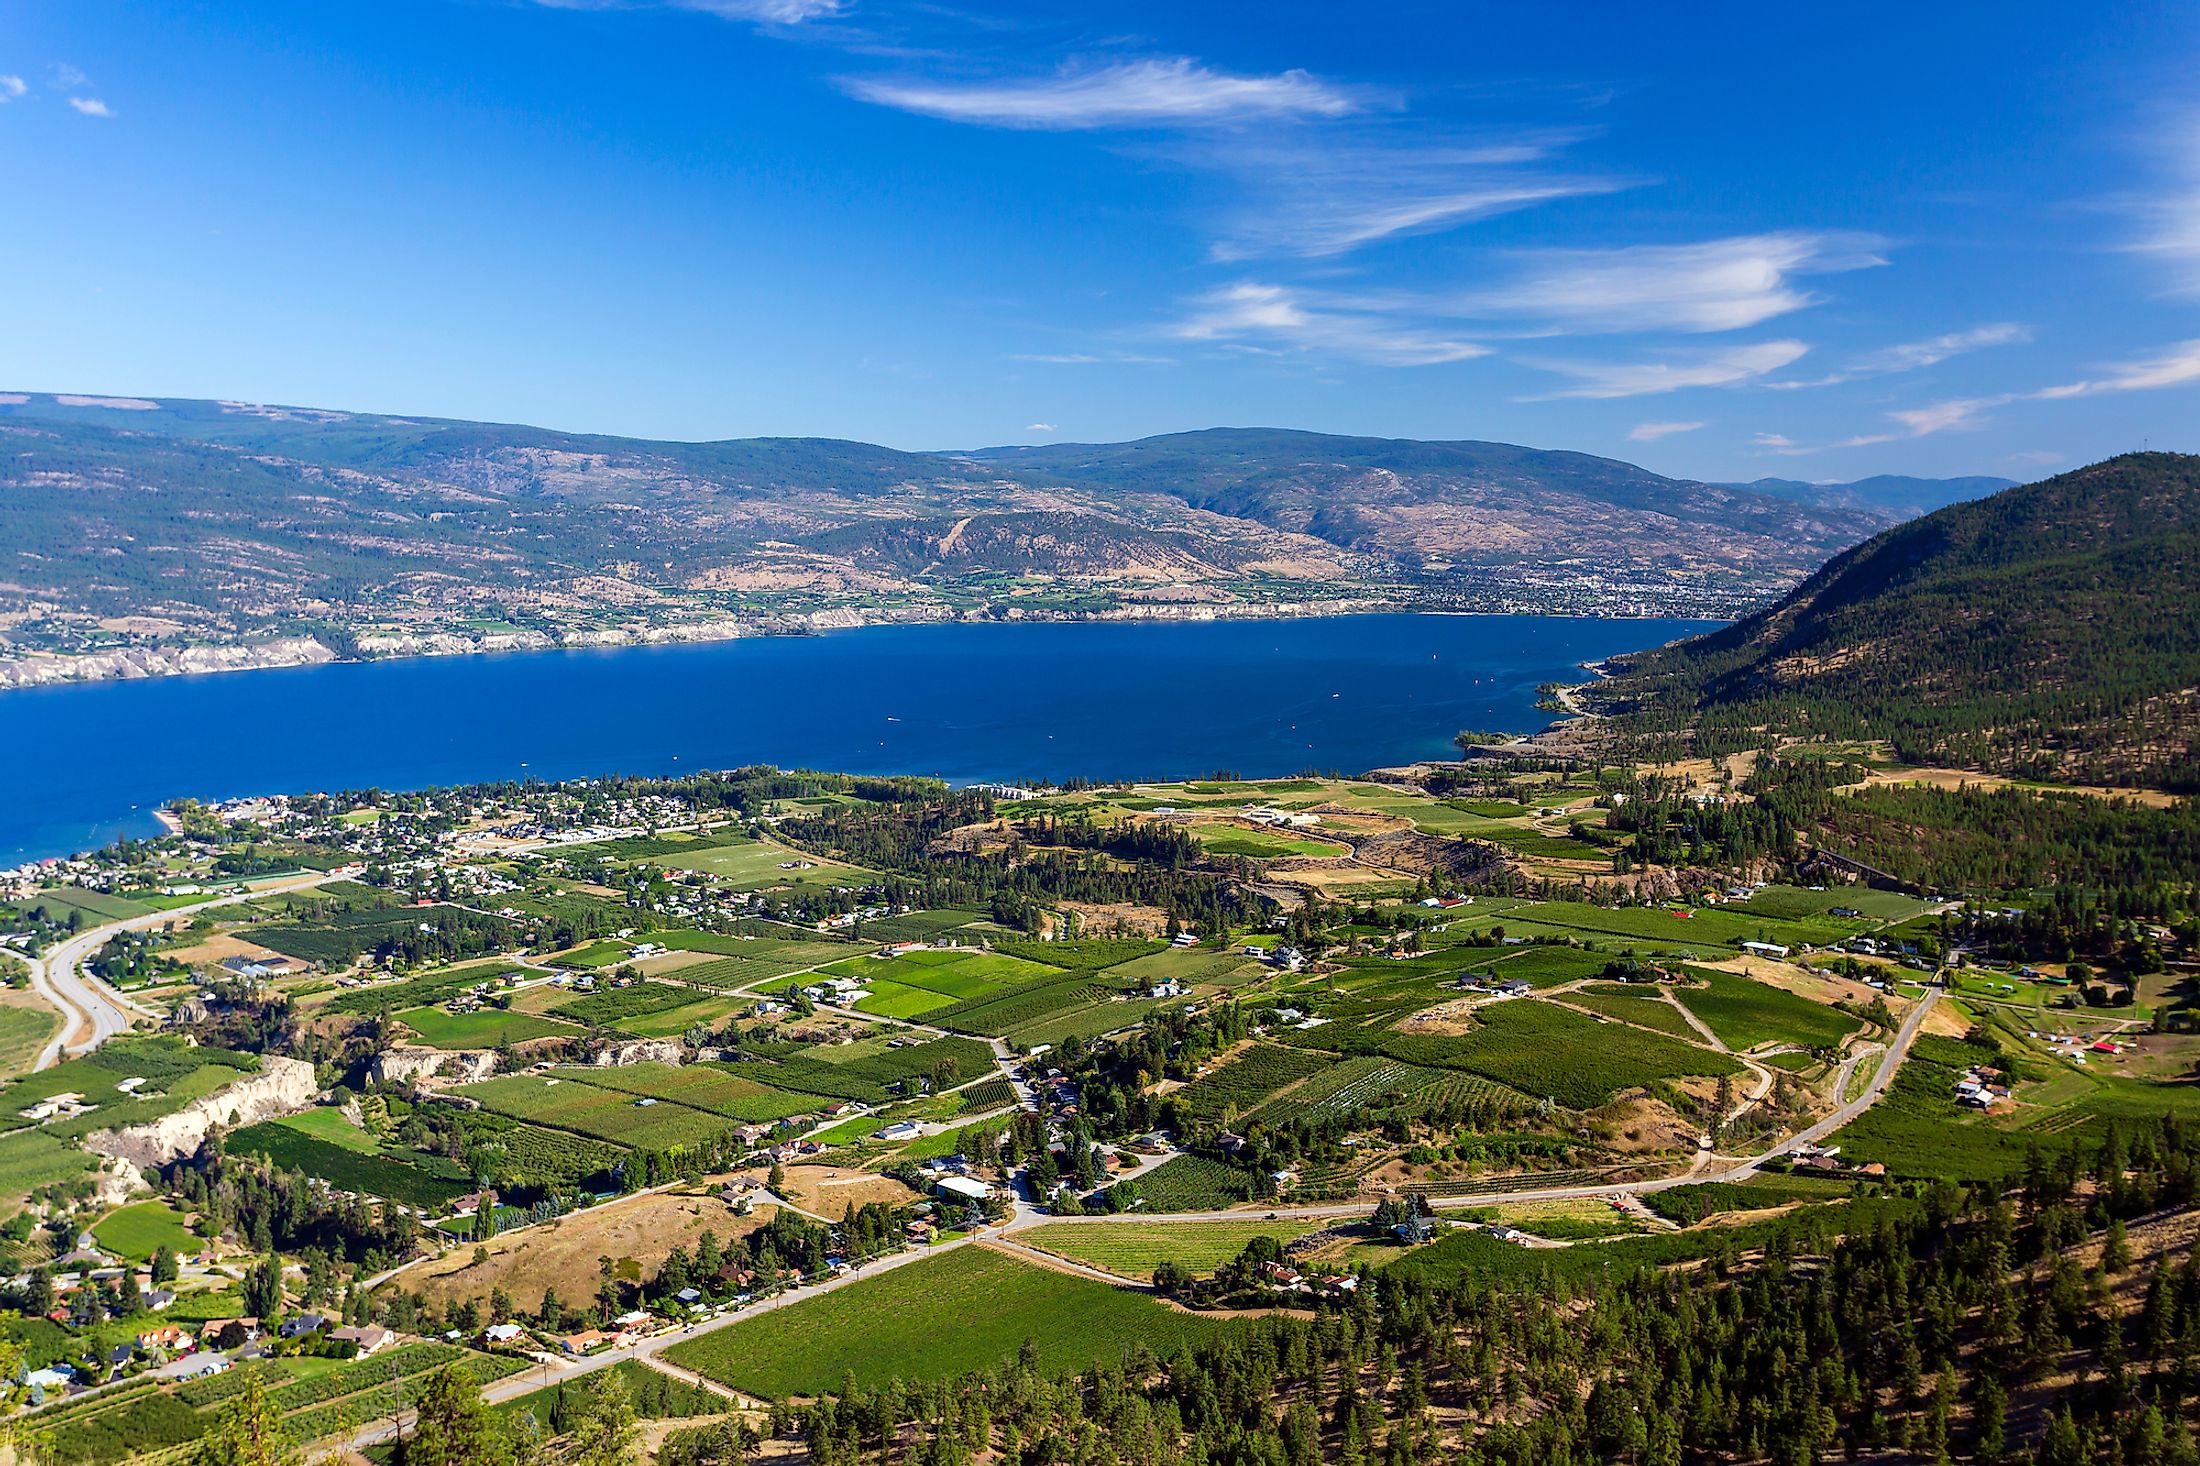 View of agricultural fields, vineyards, and Okanagan Lake from Giants Head Mountain in Summerland.